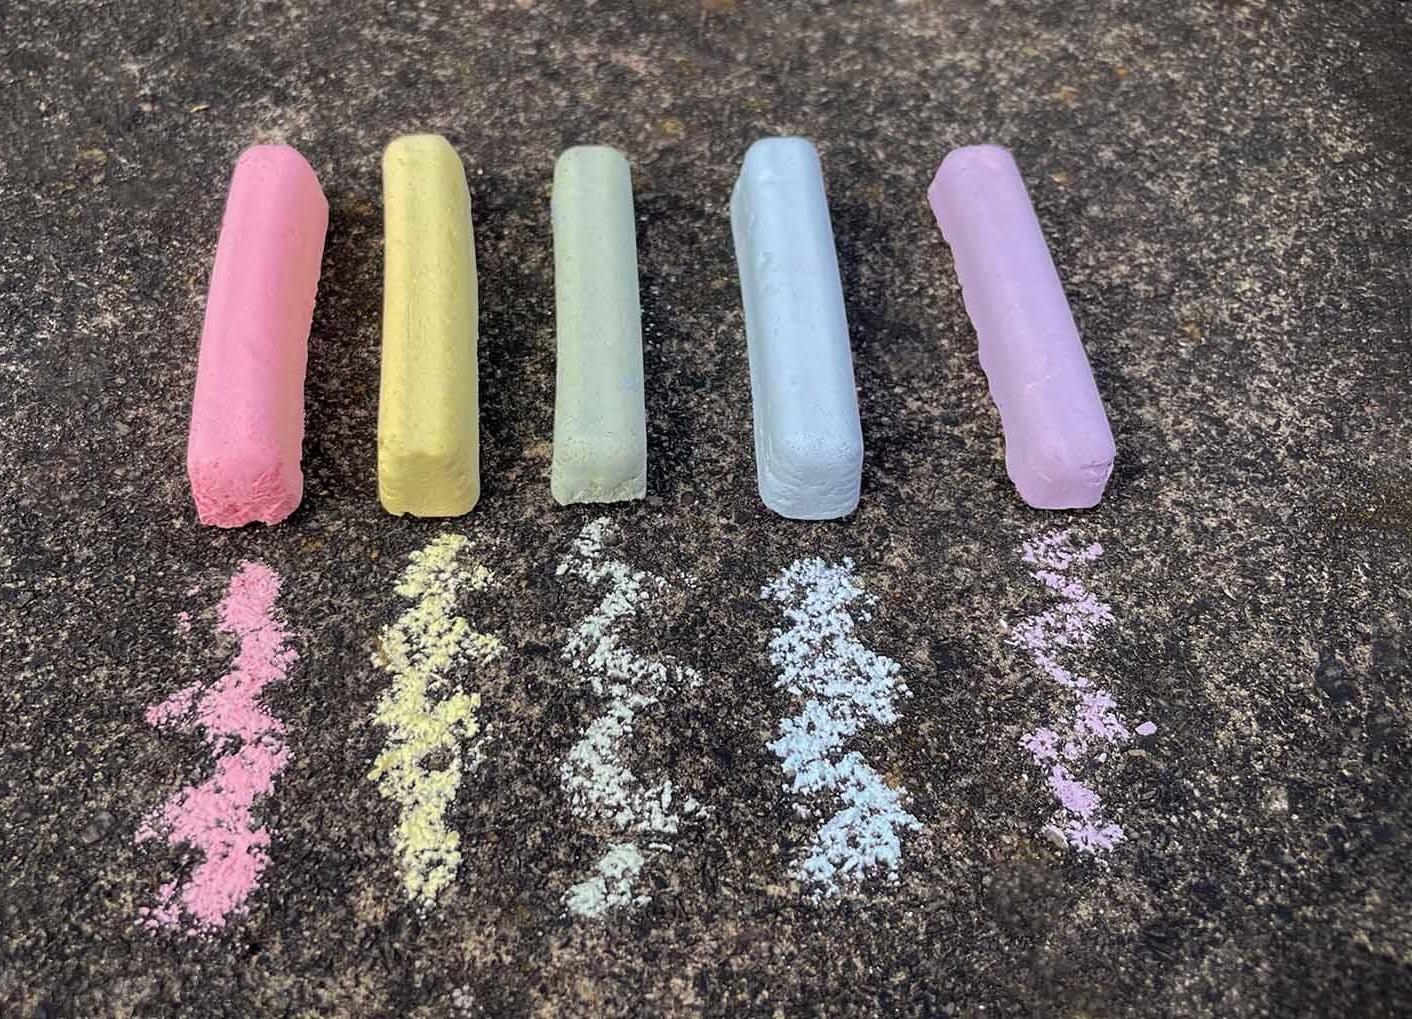 Make Your Own Sidewalk Chalk: an Easy and Fun Project for Kids